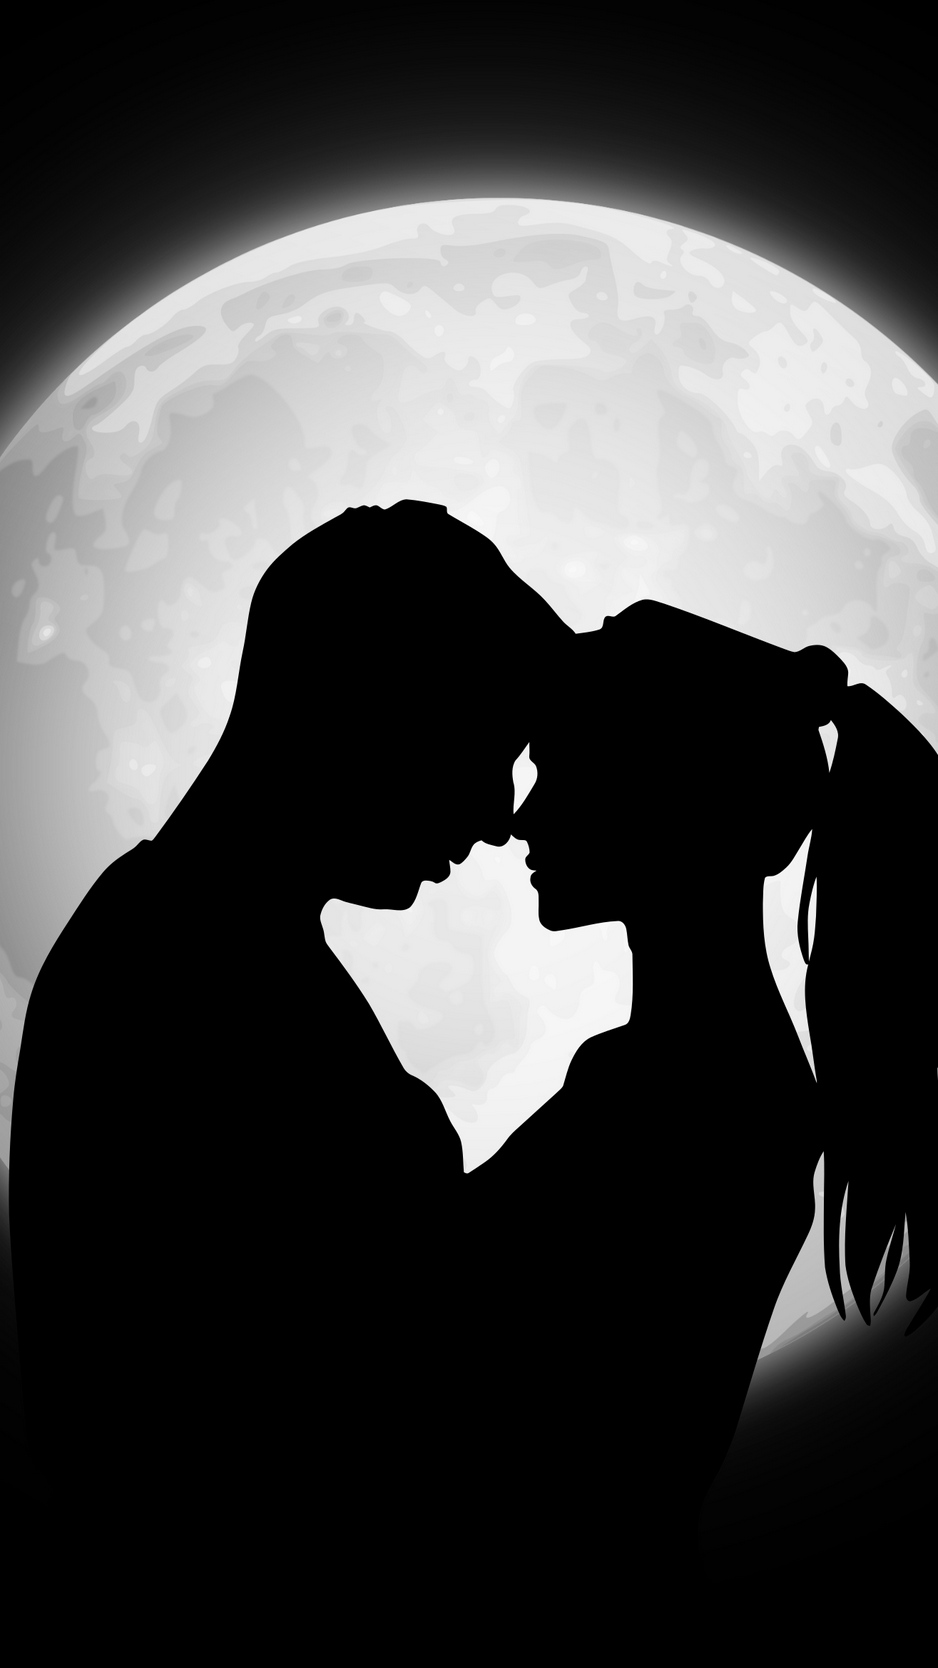 Wallpaper Couple, Silhouettes, Moon, Love - Love Black And White - HD Wallpaper 